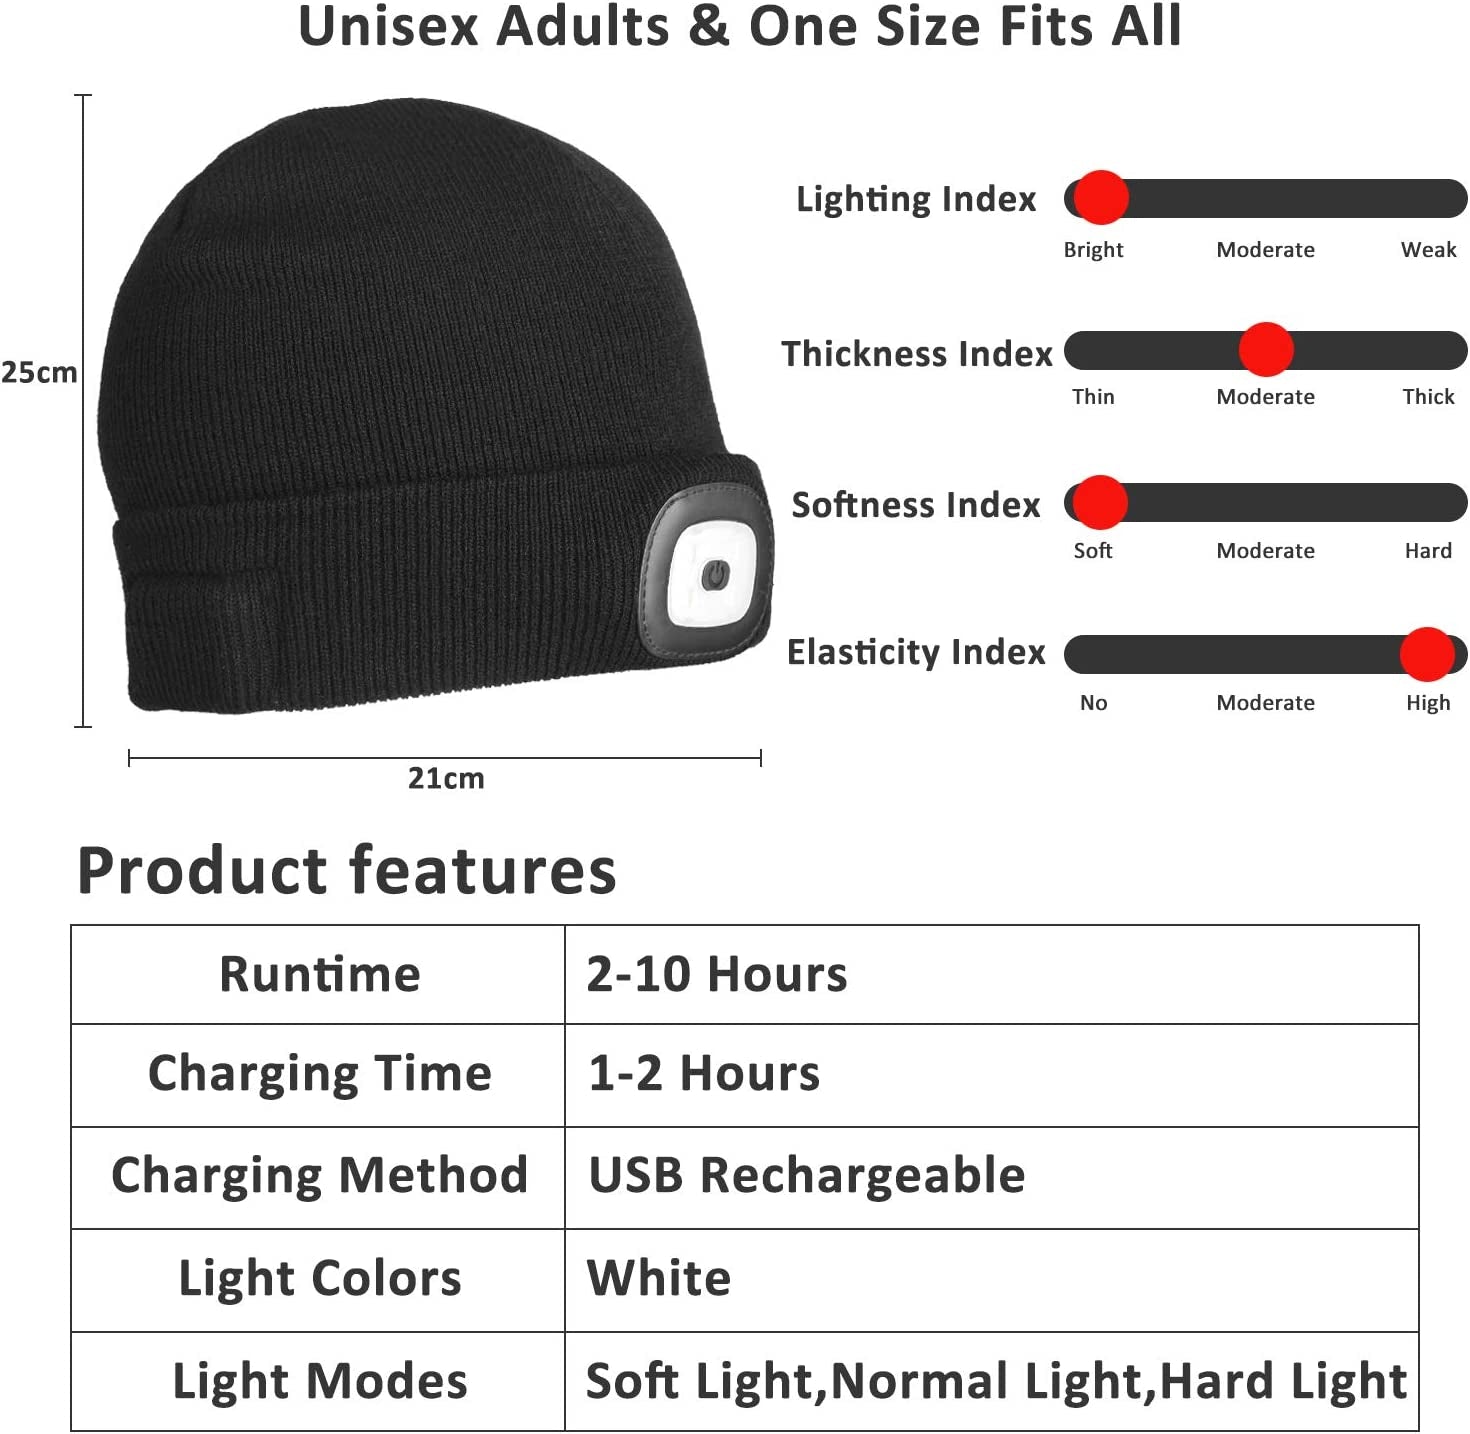 LED Beanie with Light (2 Pack), Gifts for Men Dad Husband Him Women, USB Rechargeable Lighted Cap Headlamp Hat, Unisex Warm Winter Knitted LED Hat with Flashlight